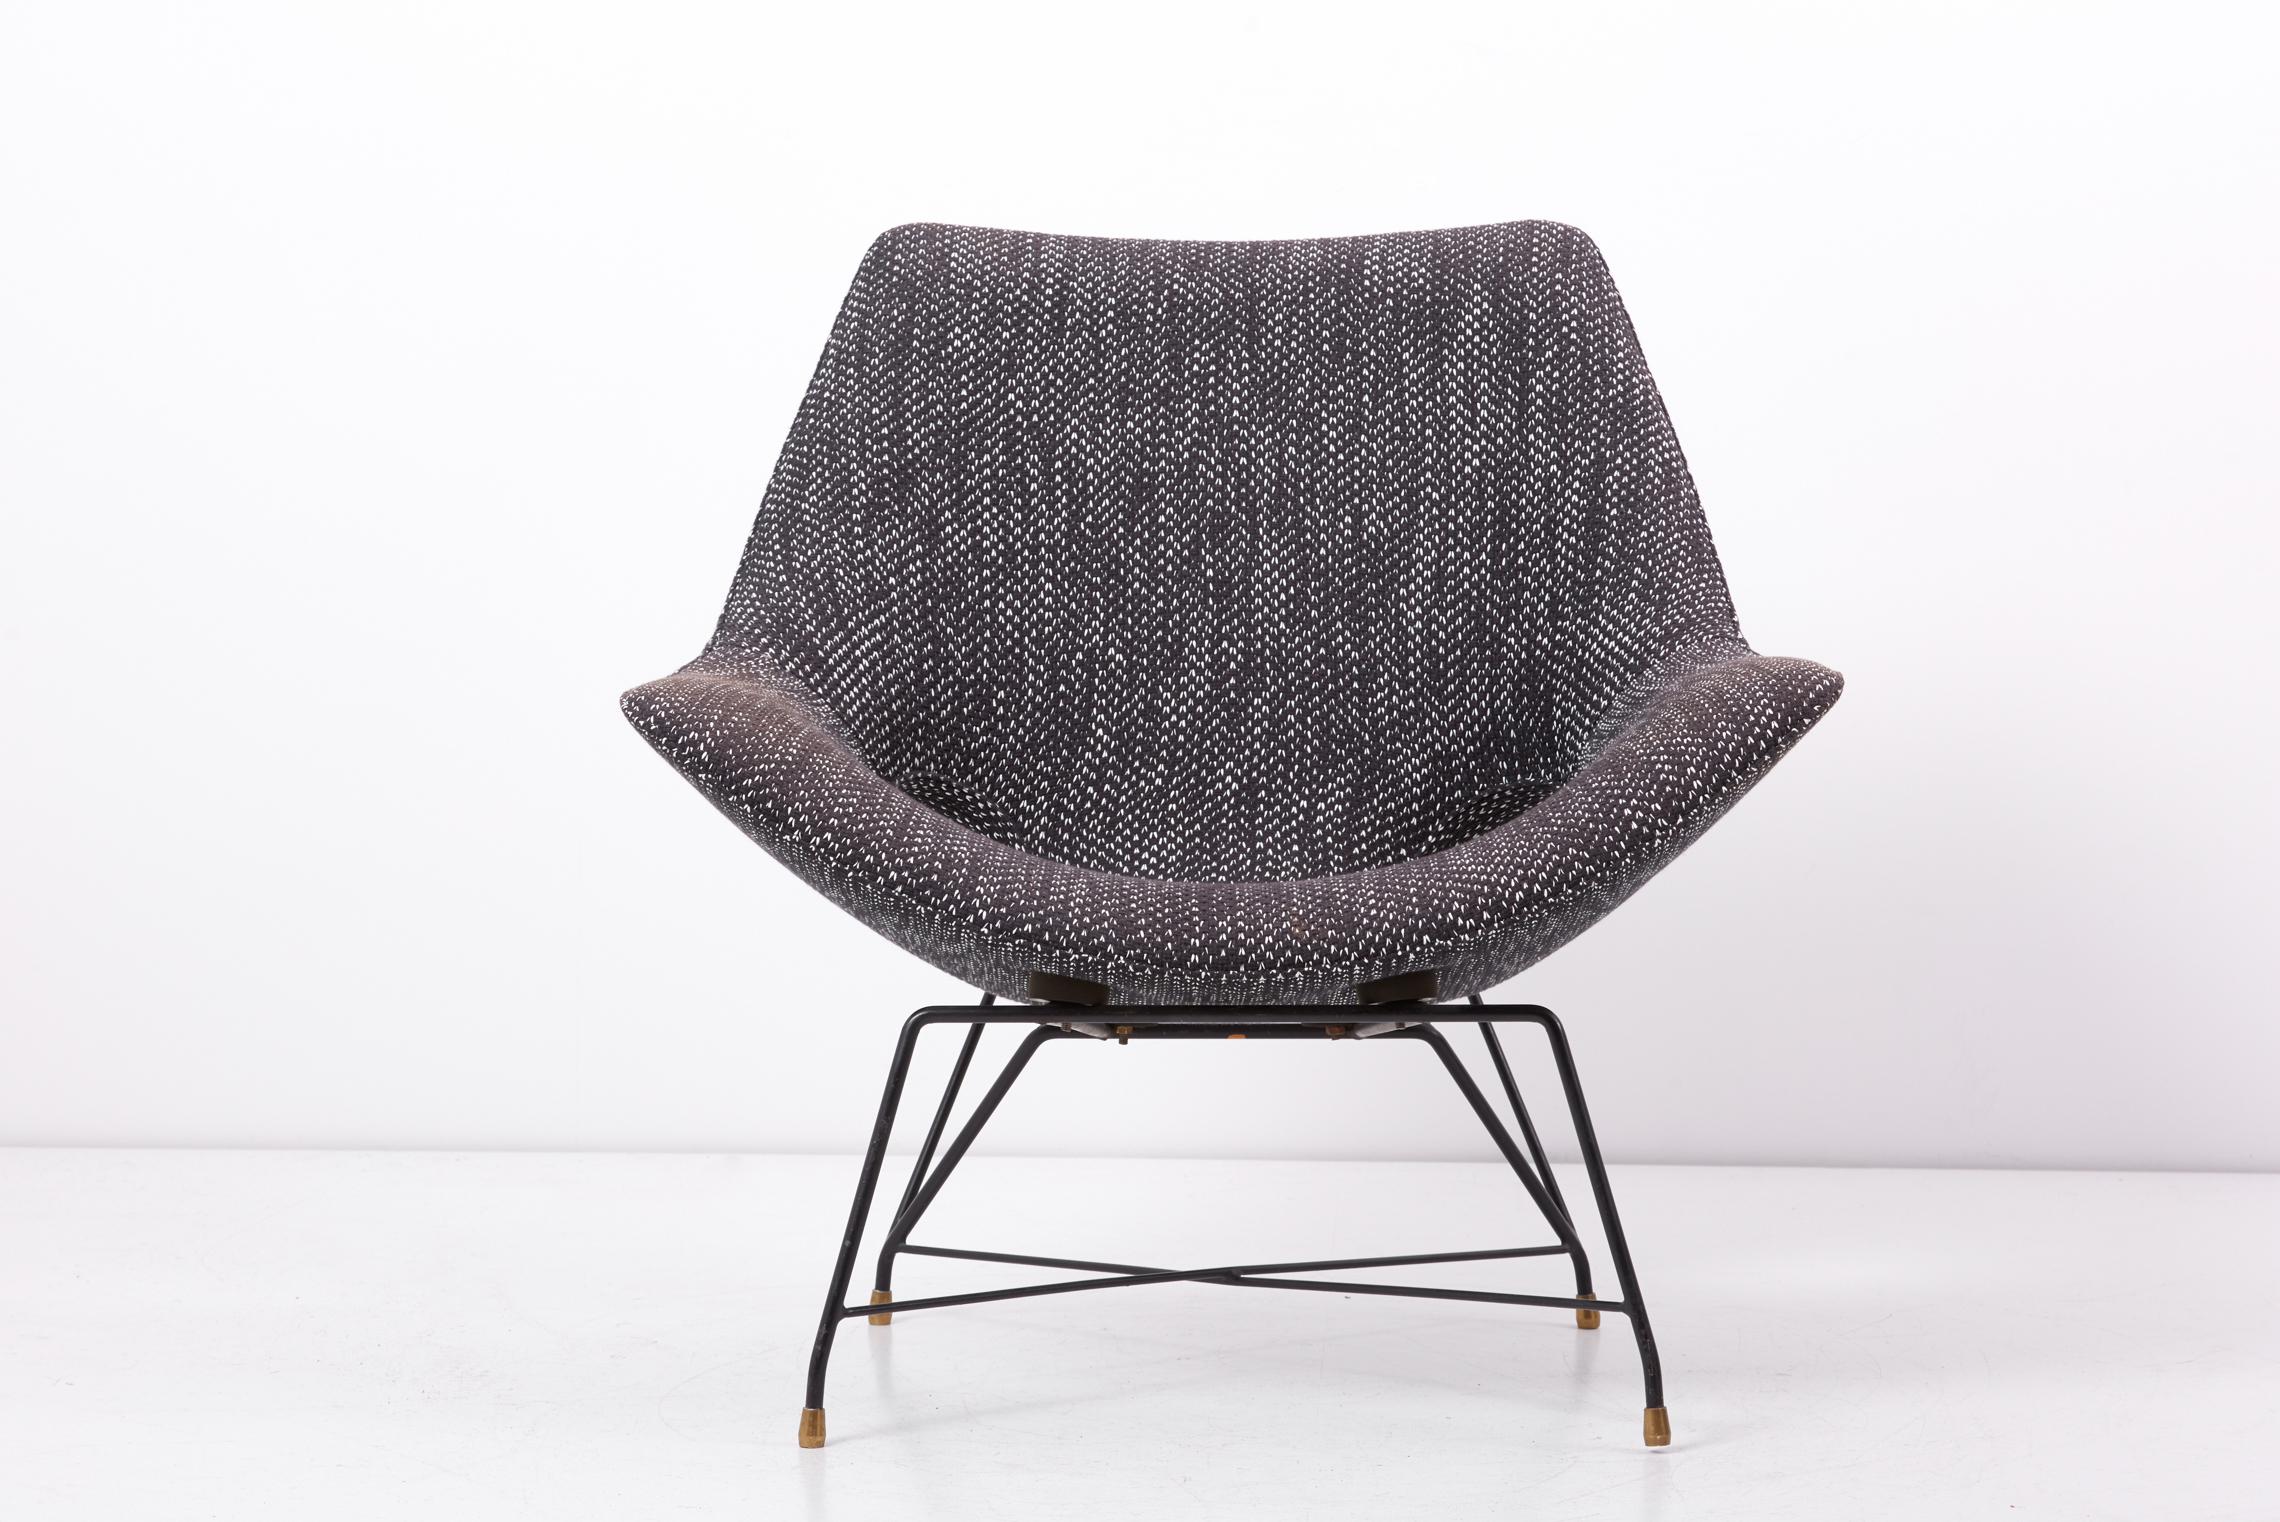 Lounge Chair by Augusto Bozzi for Saporiti in black & white fabric, Italy, 1950s For Sale 7